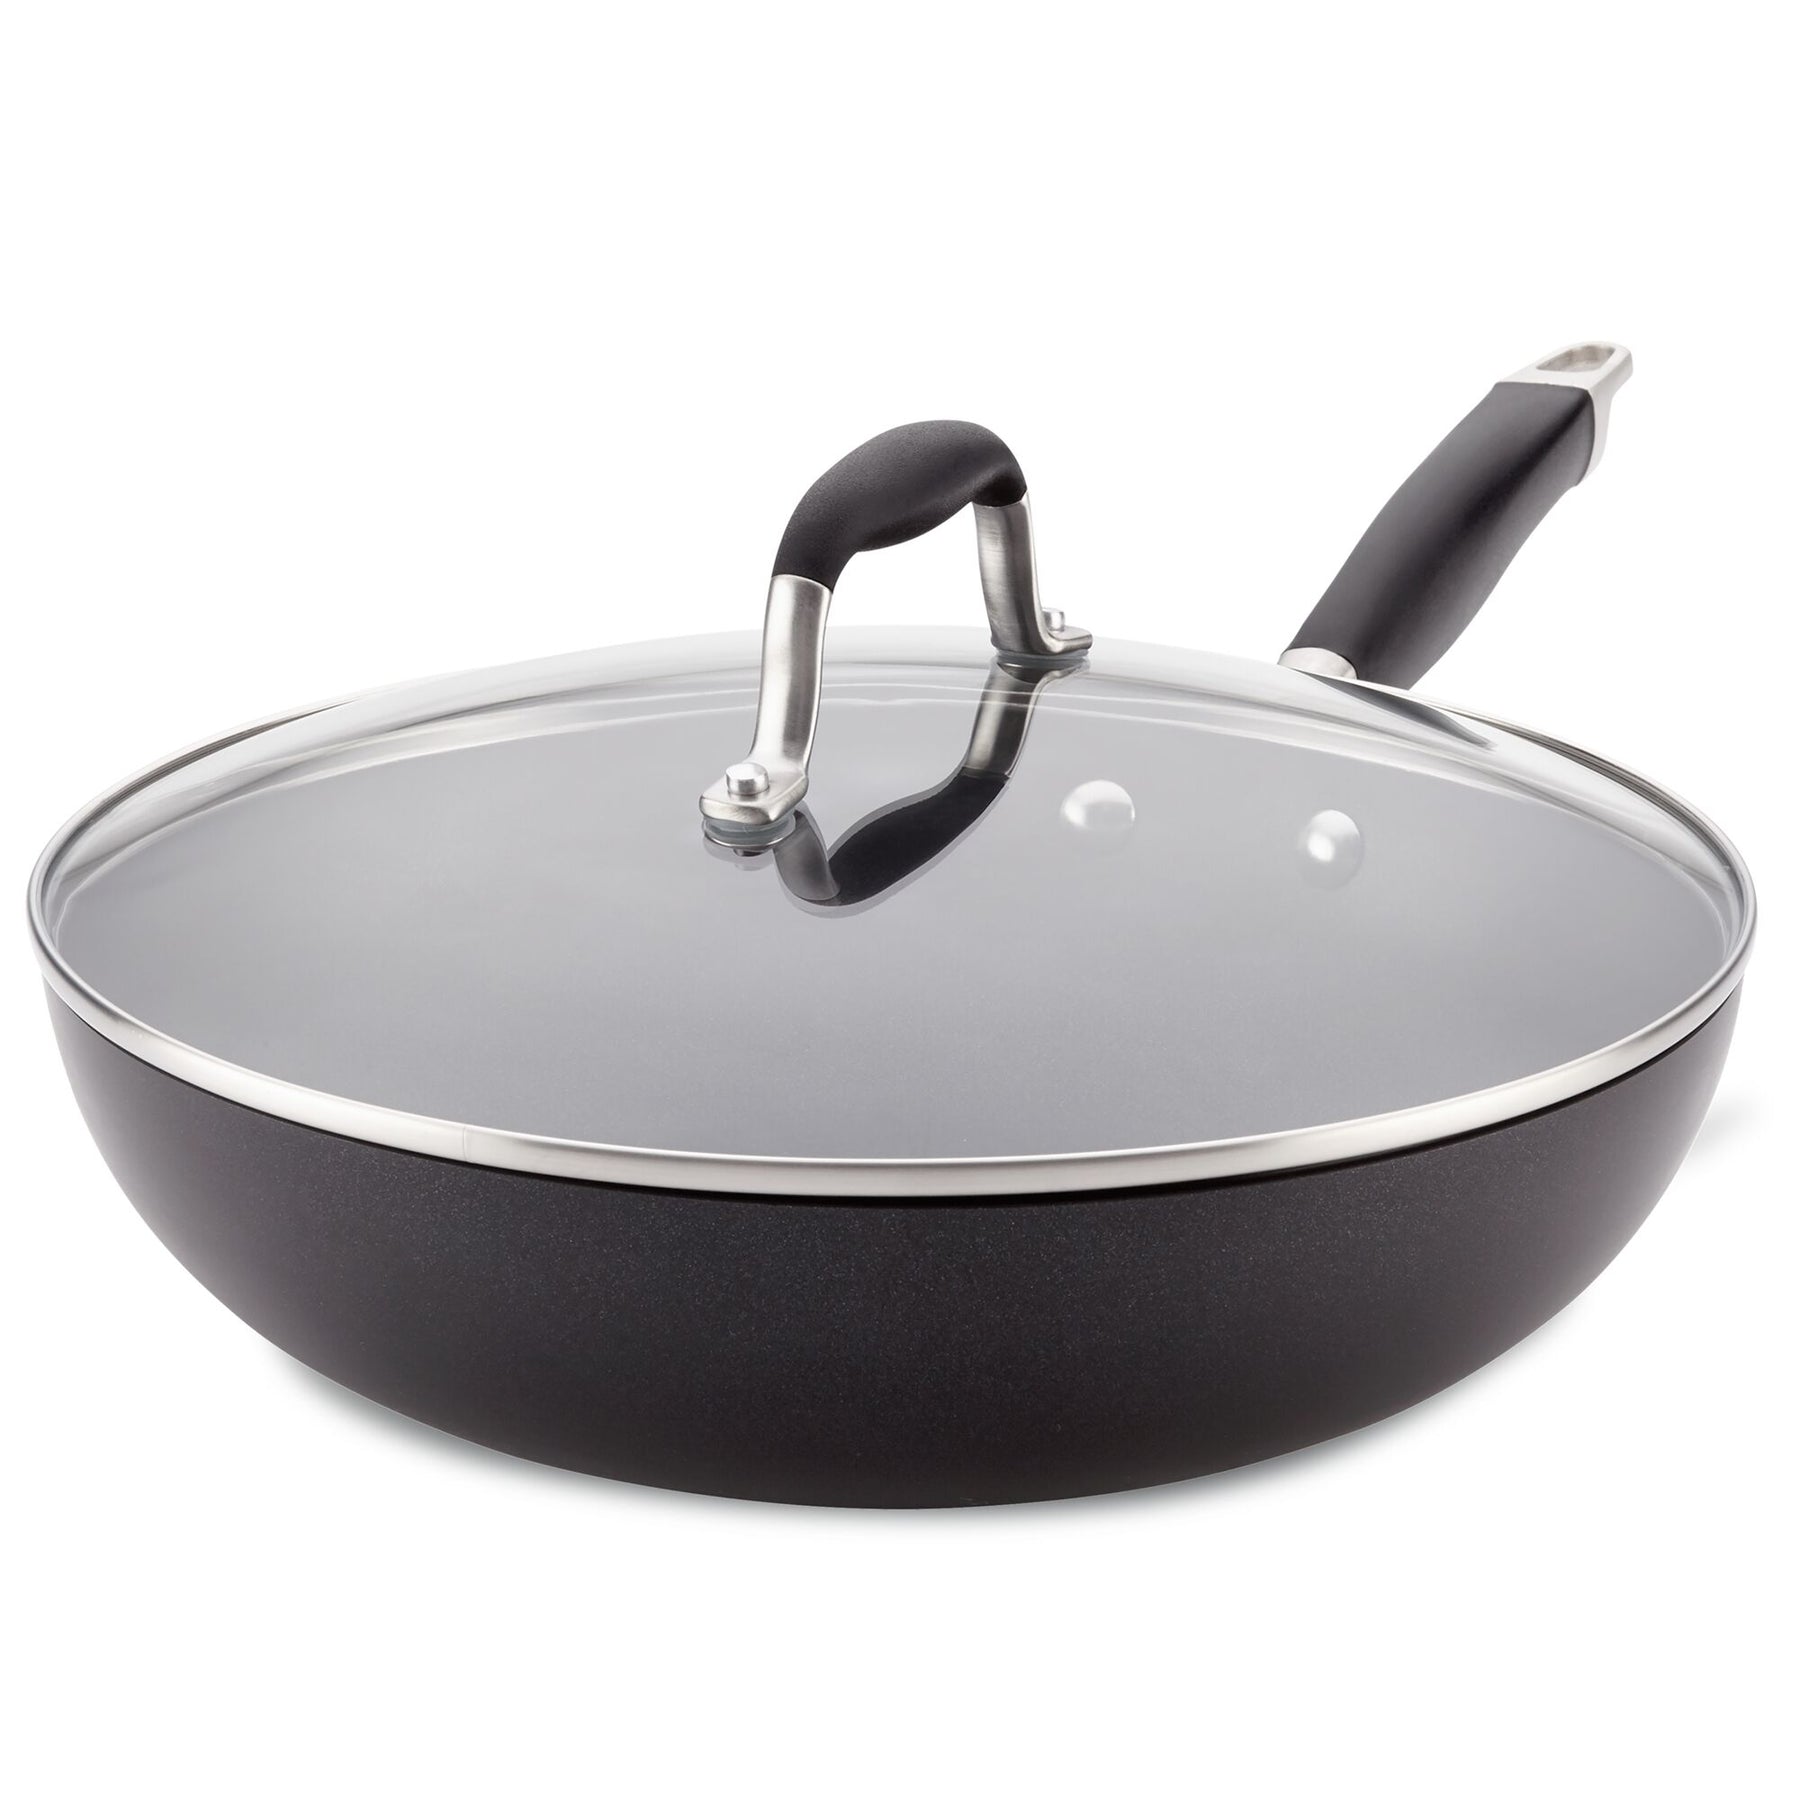 Classic™ Hard-Anodized Nonstick 12-Inch Fry Pan